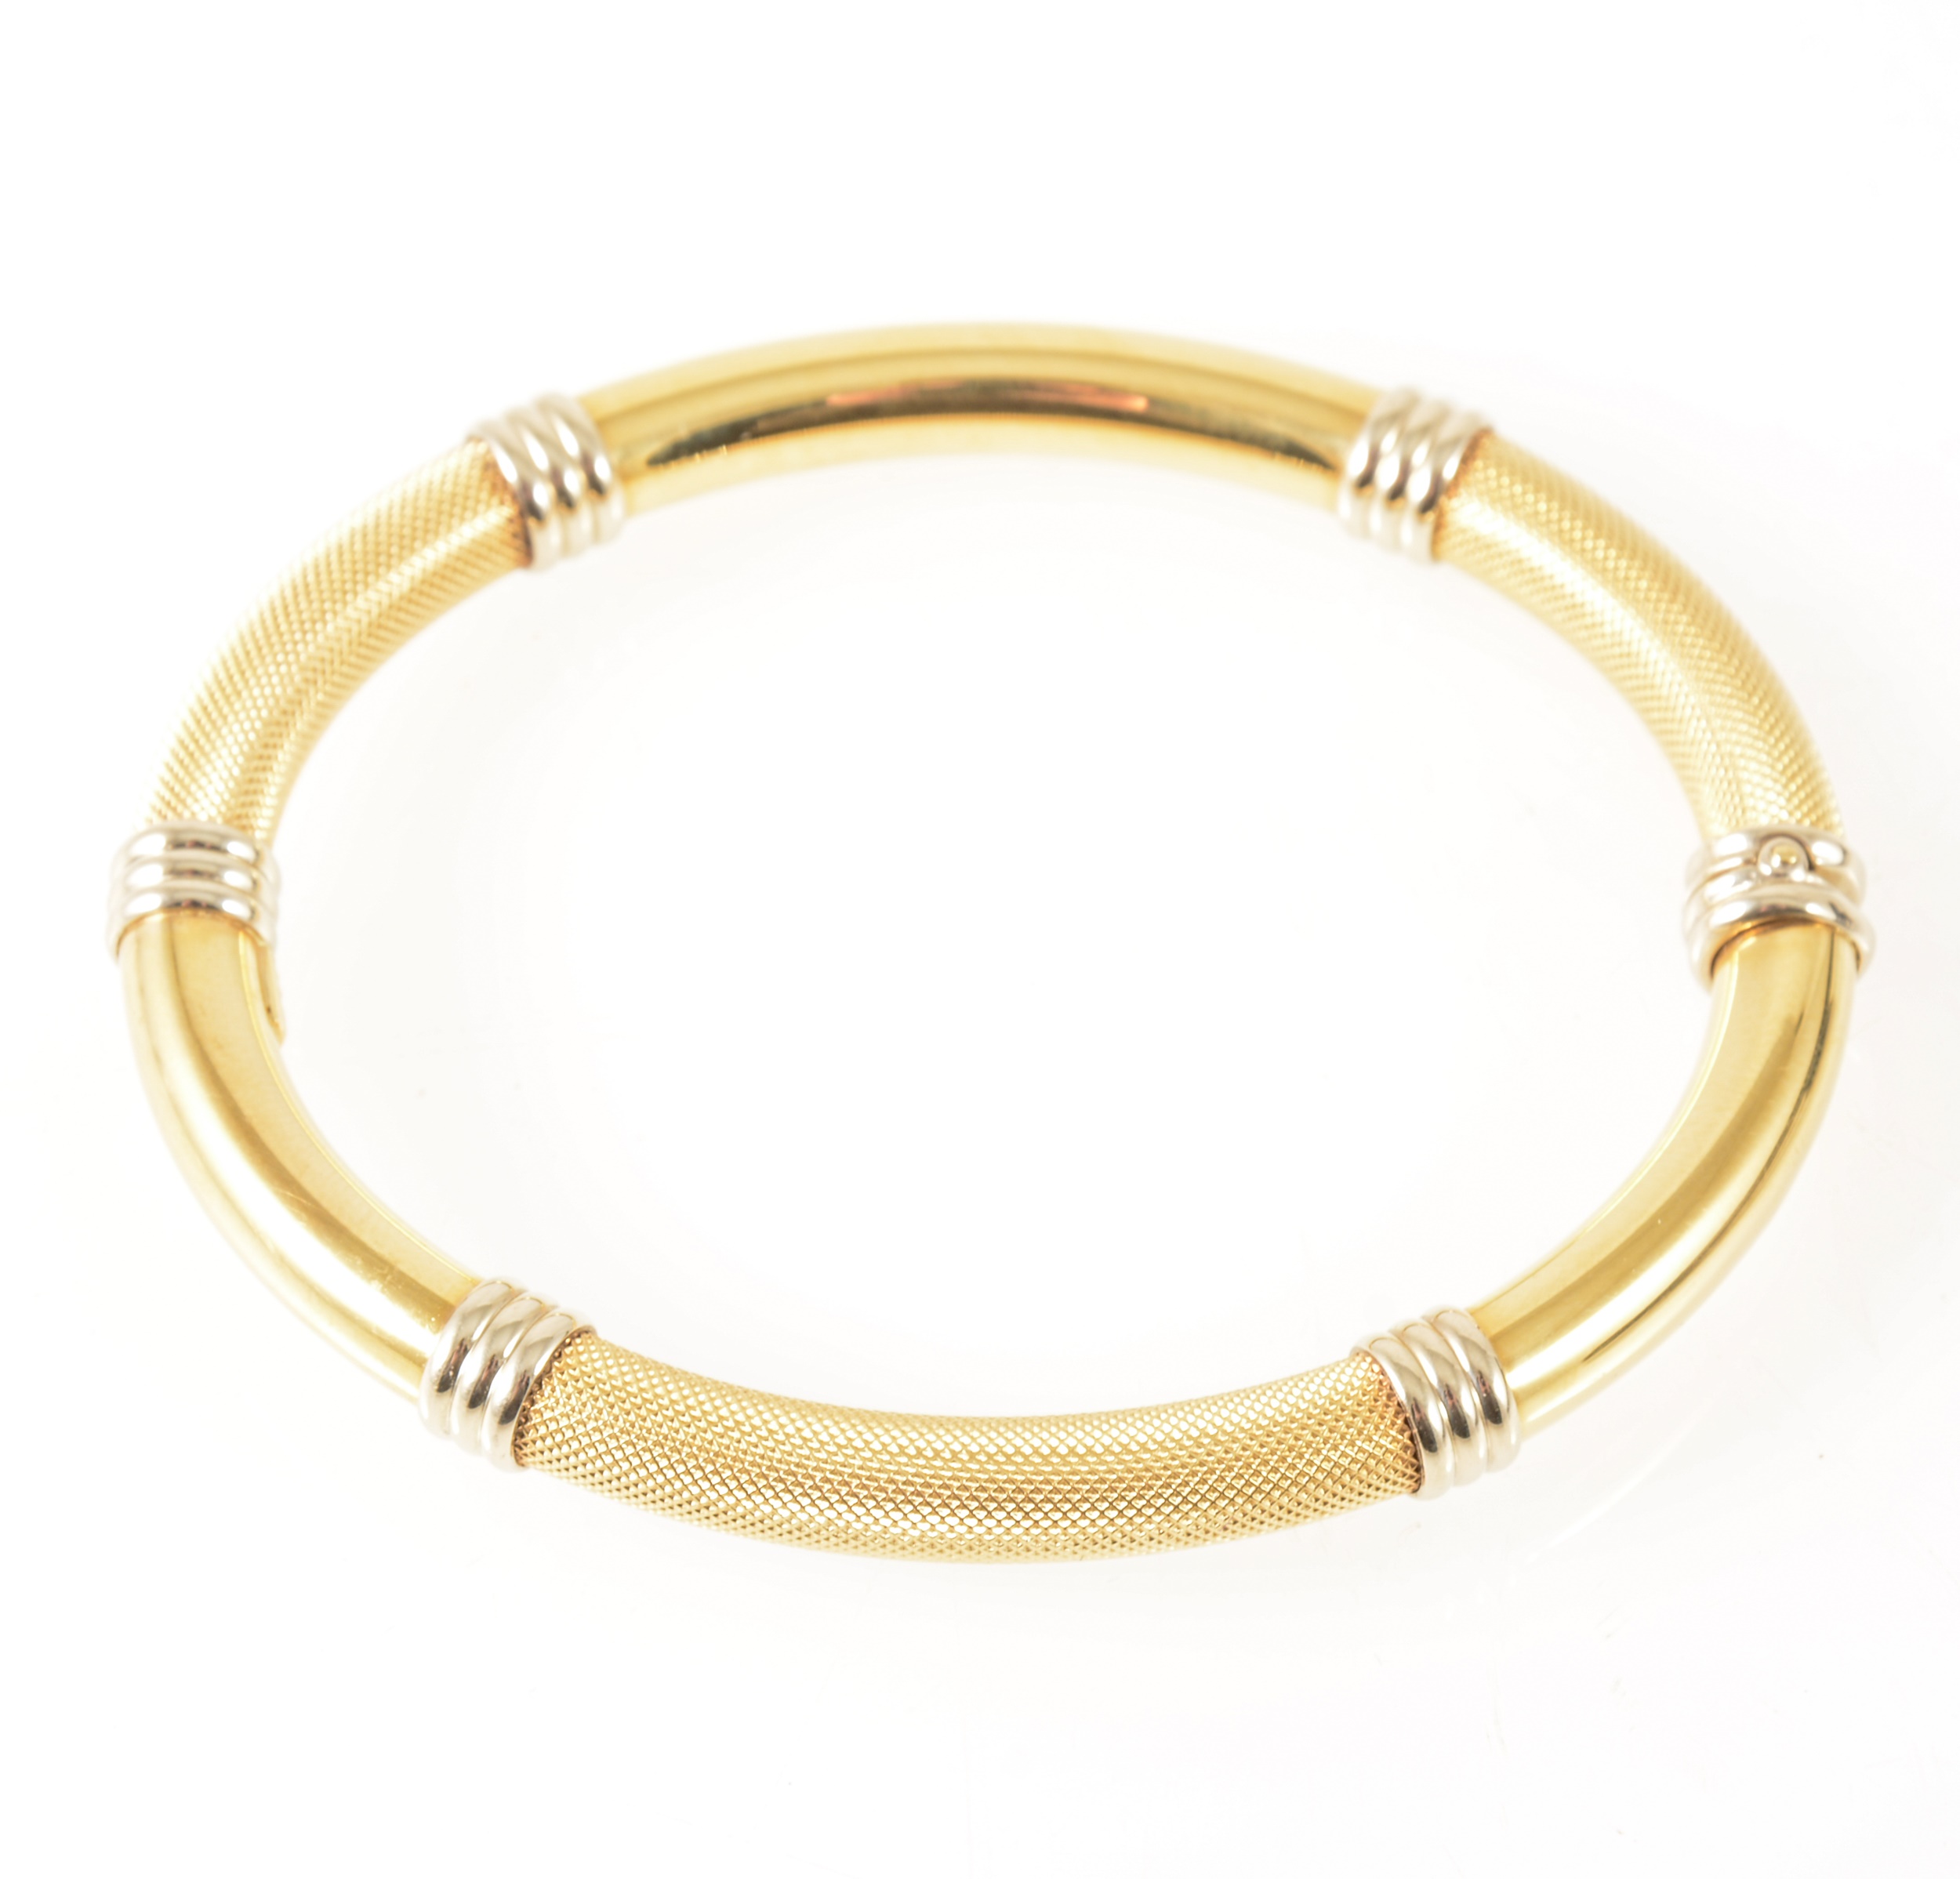 WITHDRAWN - A modern yellow and white metal half hinged bangle marked 750.